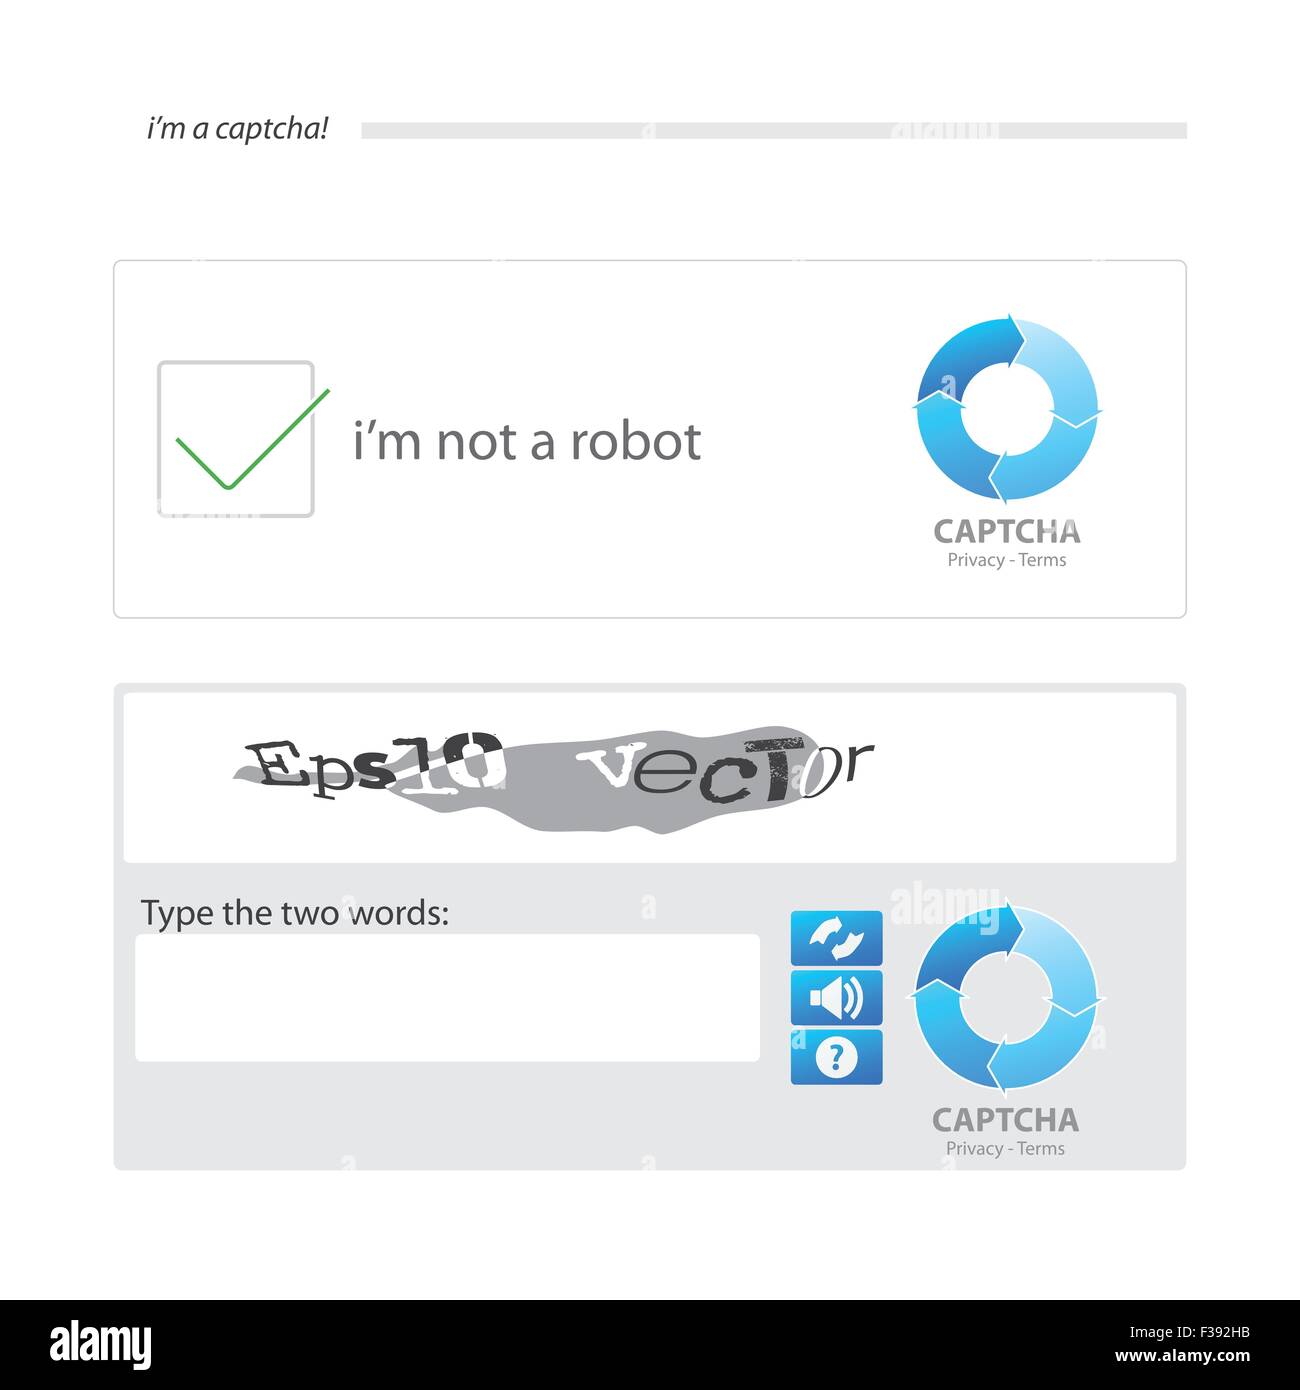 Completely Automated Public Turing test to tell Computers and Humans Apart (CAPTCHA)